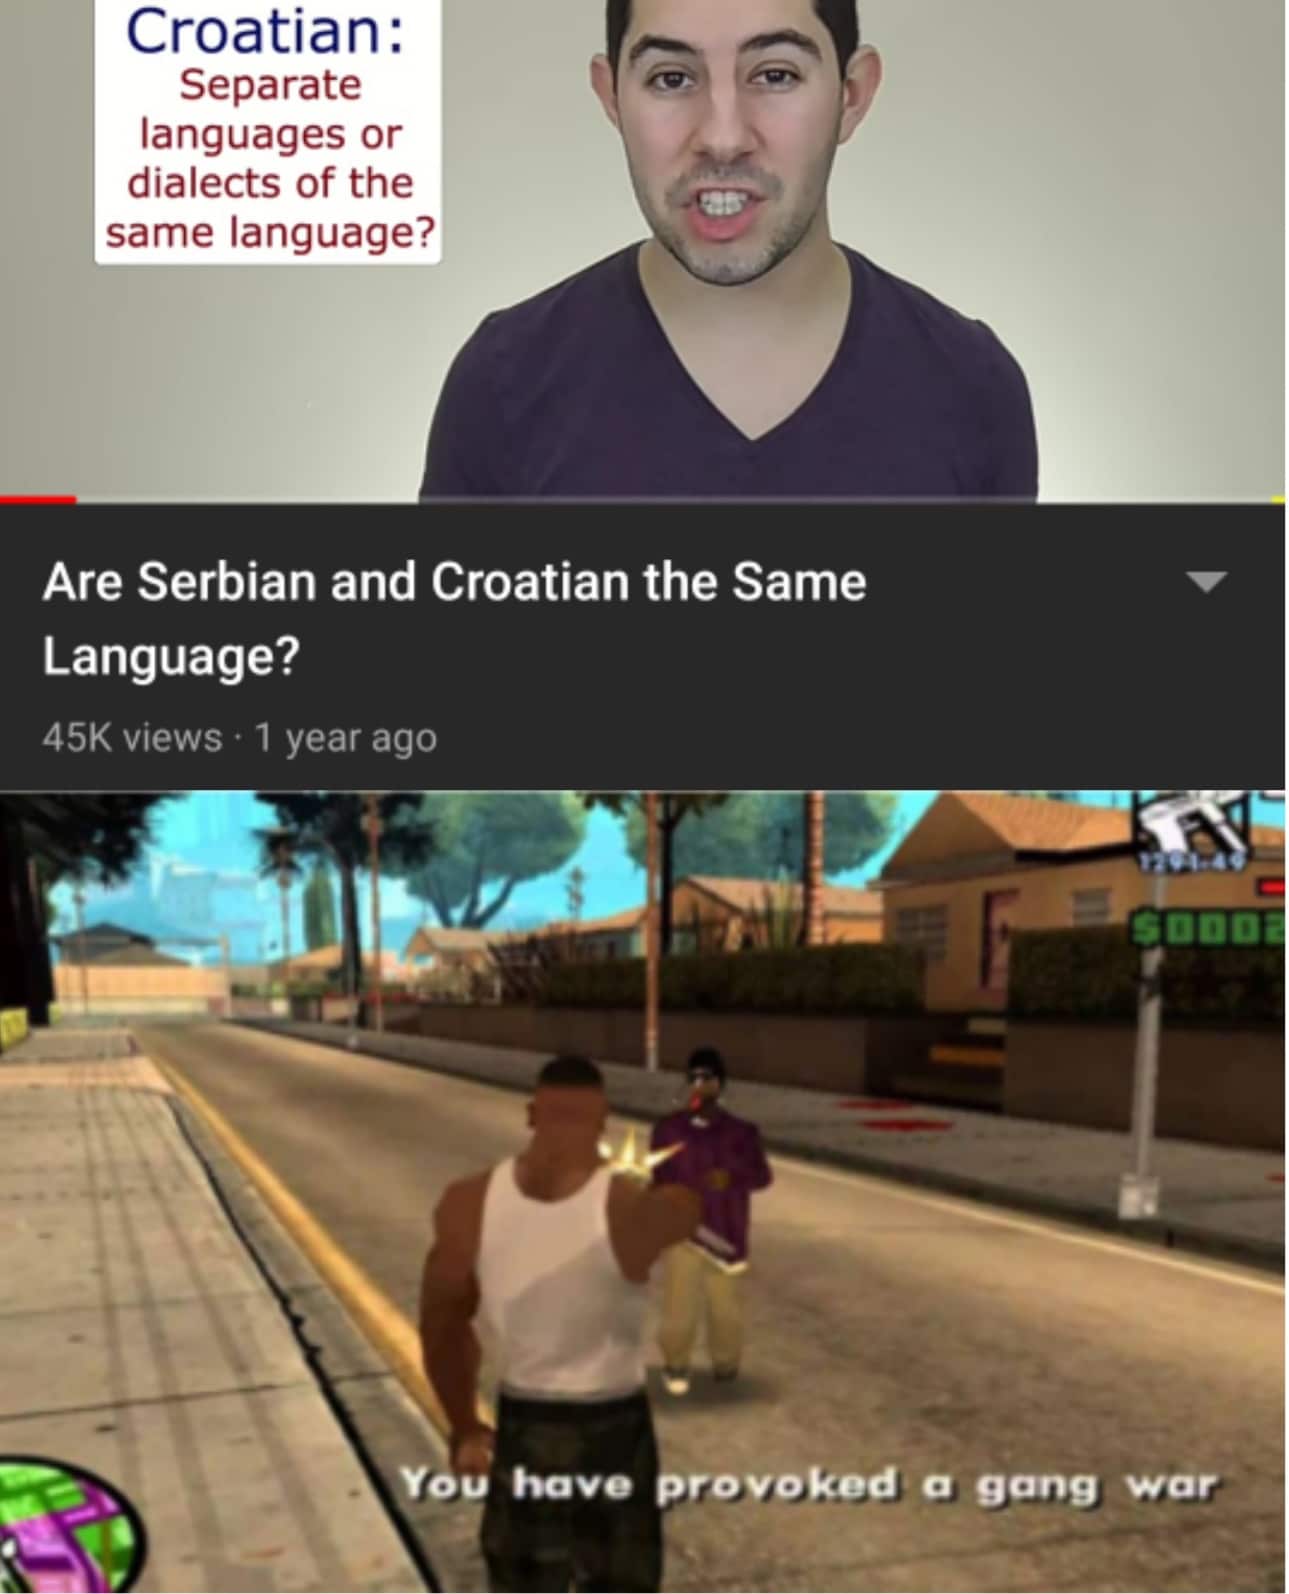 History, Croatian, Bosnian, Serbian, Serbs, Montenegrin History Memes History, Croatian, Bosnian, Serbian, Serbs, Montenegrin text: Croatian: Separate languages or dialects of the same language? Are Serbian and Croatian the Same Language? 45K views • 1 year ago You have suoo rovoked a gang war 